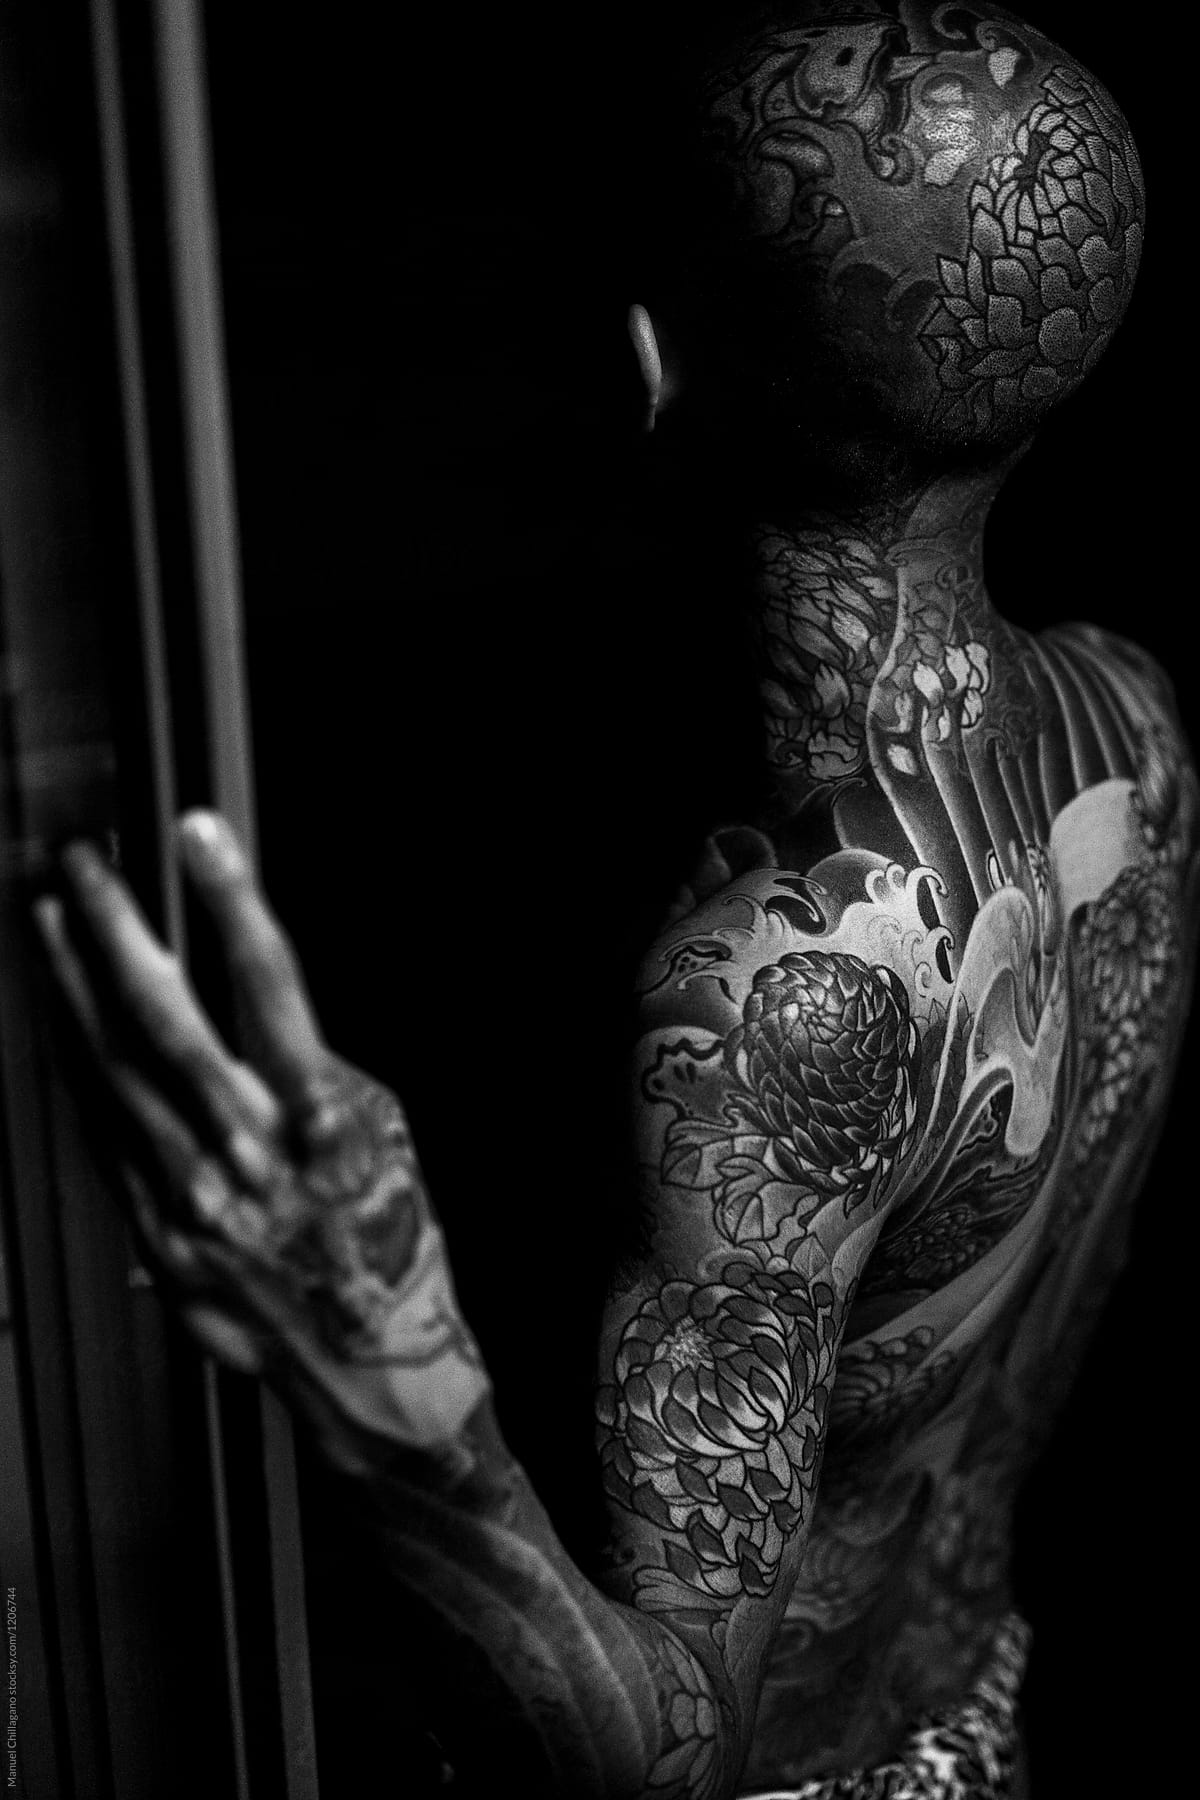 Black and White portrait of a heavily tattooed Japanese man